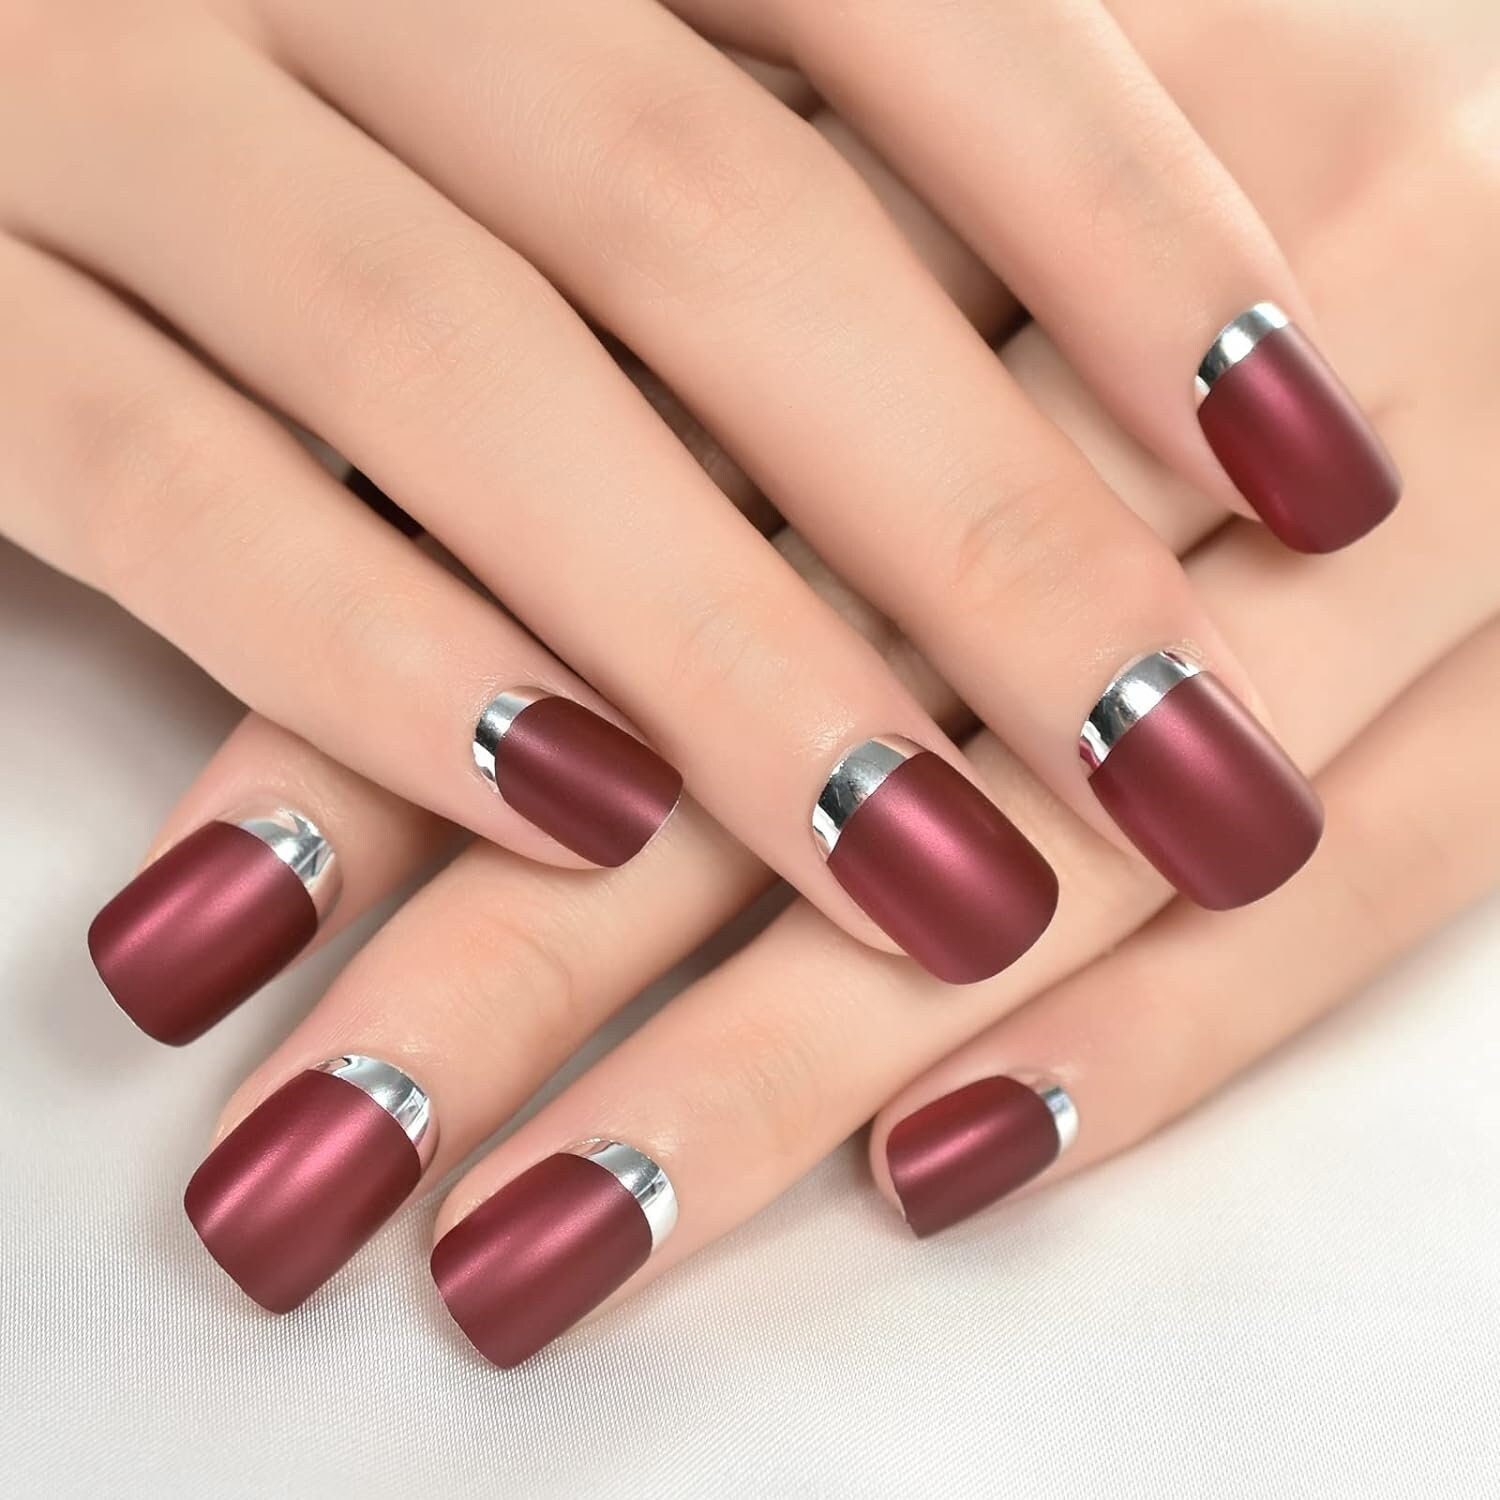 Elegant Nails and Trendy Manicure Showcase Beauty, Sophistication, and  Creativity in Modern Nail Art, Offering a Glimpse Stock Image - Image of  colour, manicured: 298988839